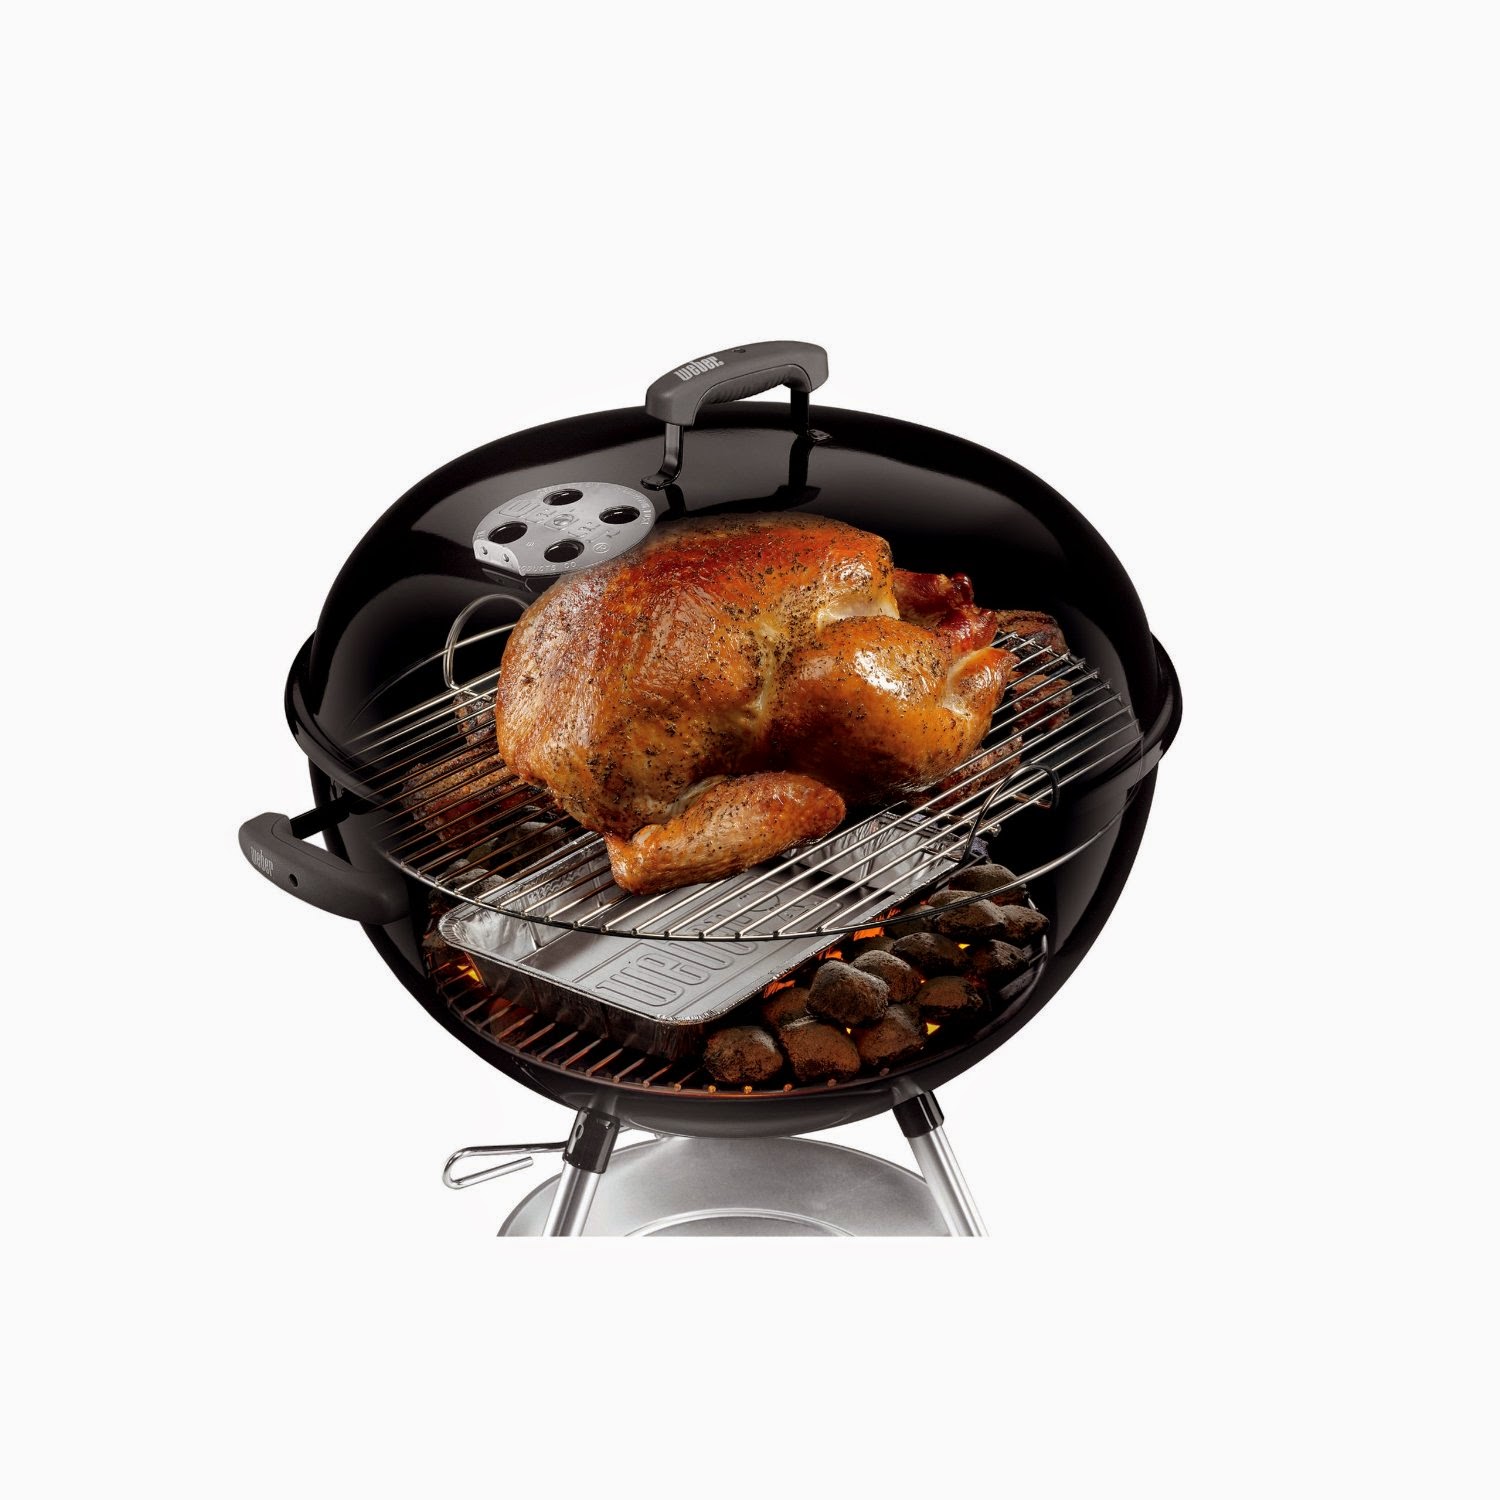 Weber 741001 Kettle Grill, cook whole chicken